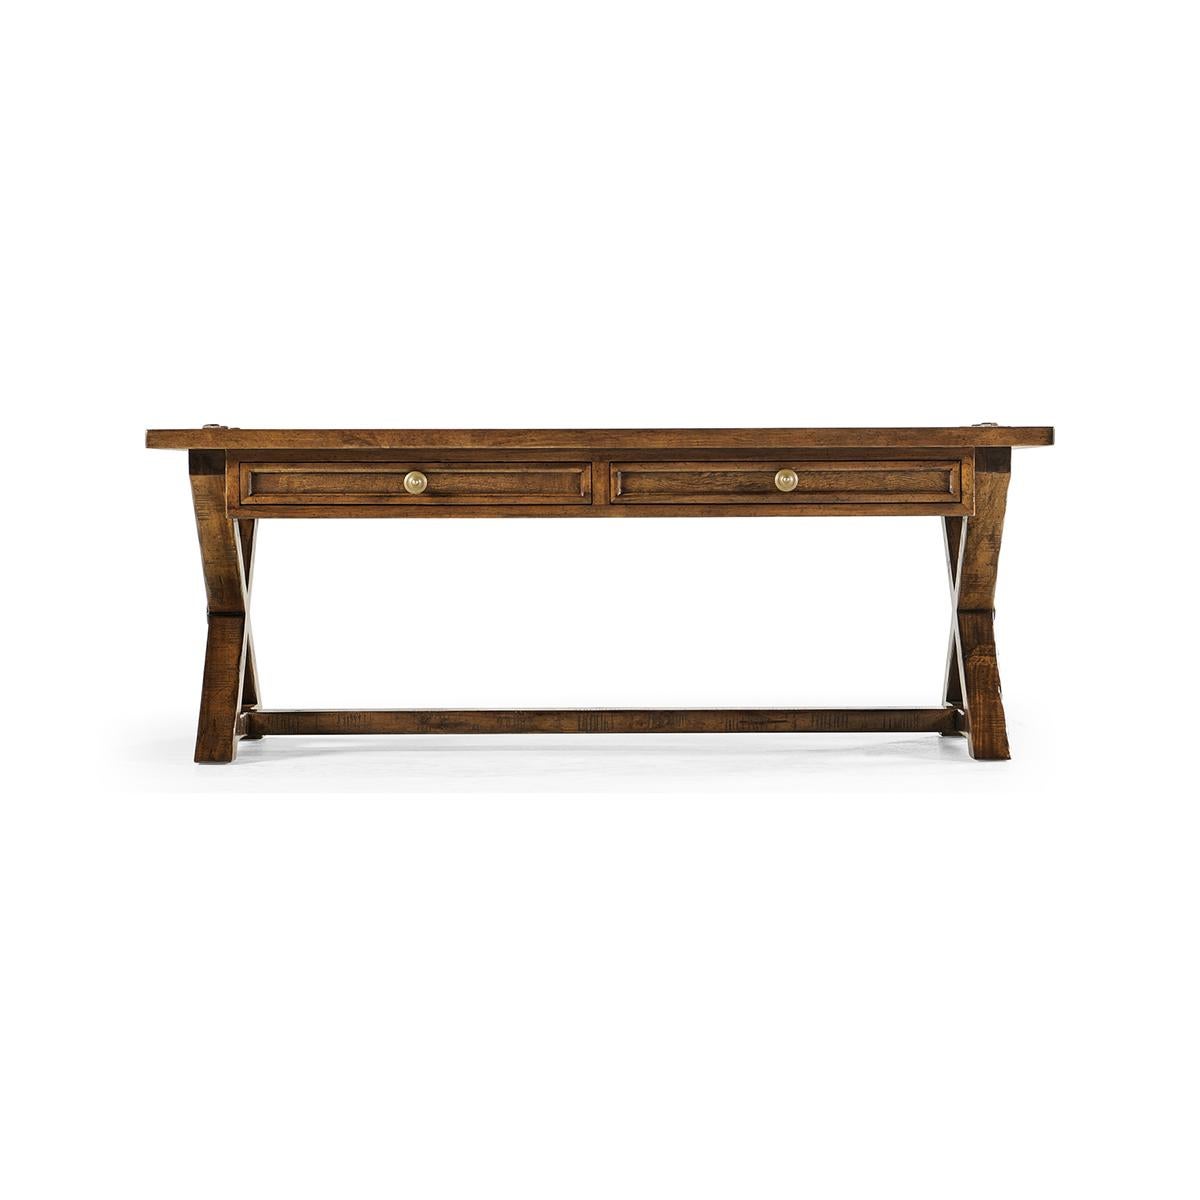 Rectangular country coffee table with a rustic walnut finish revealing exposed saw marks. Two small oak-lined drawers to the front. Mortice and tenon joints to X-frame support and top surface.

Dimensions: 54